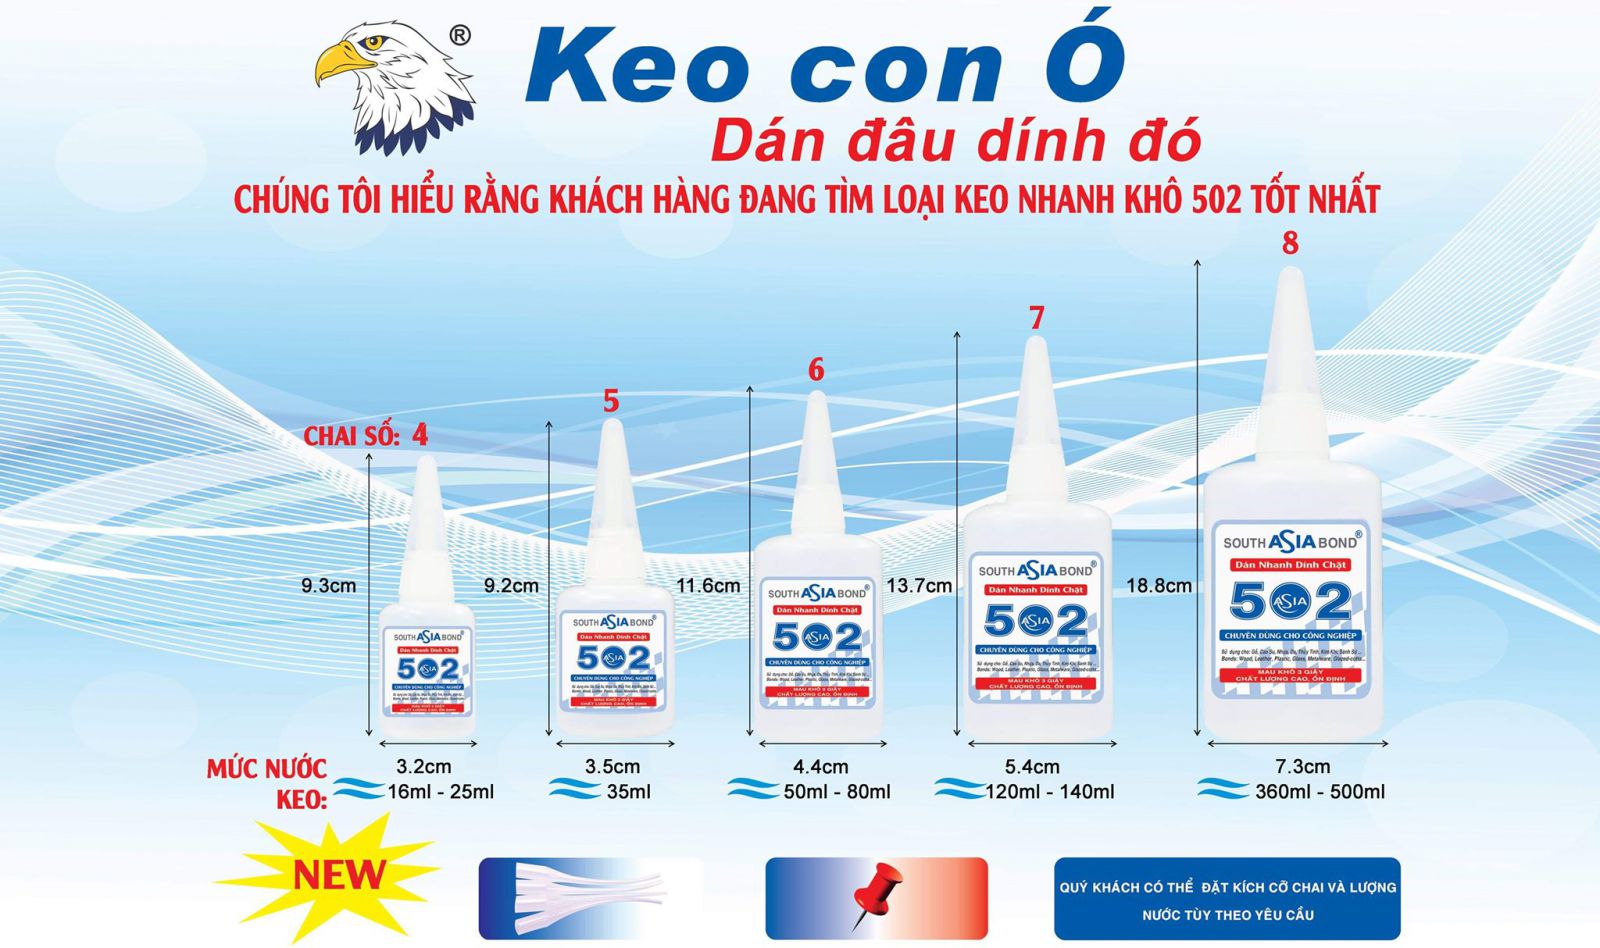 keo-502-asia thuong-hieu-viet-chat-luong-cao